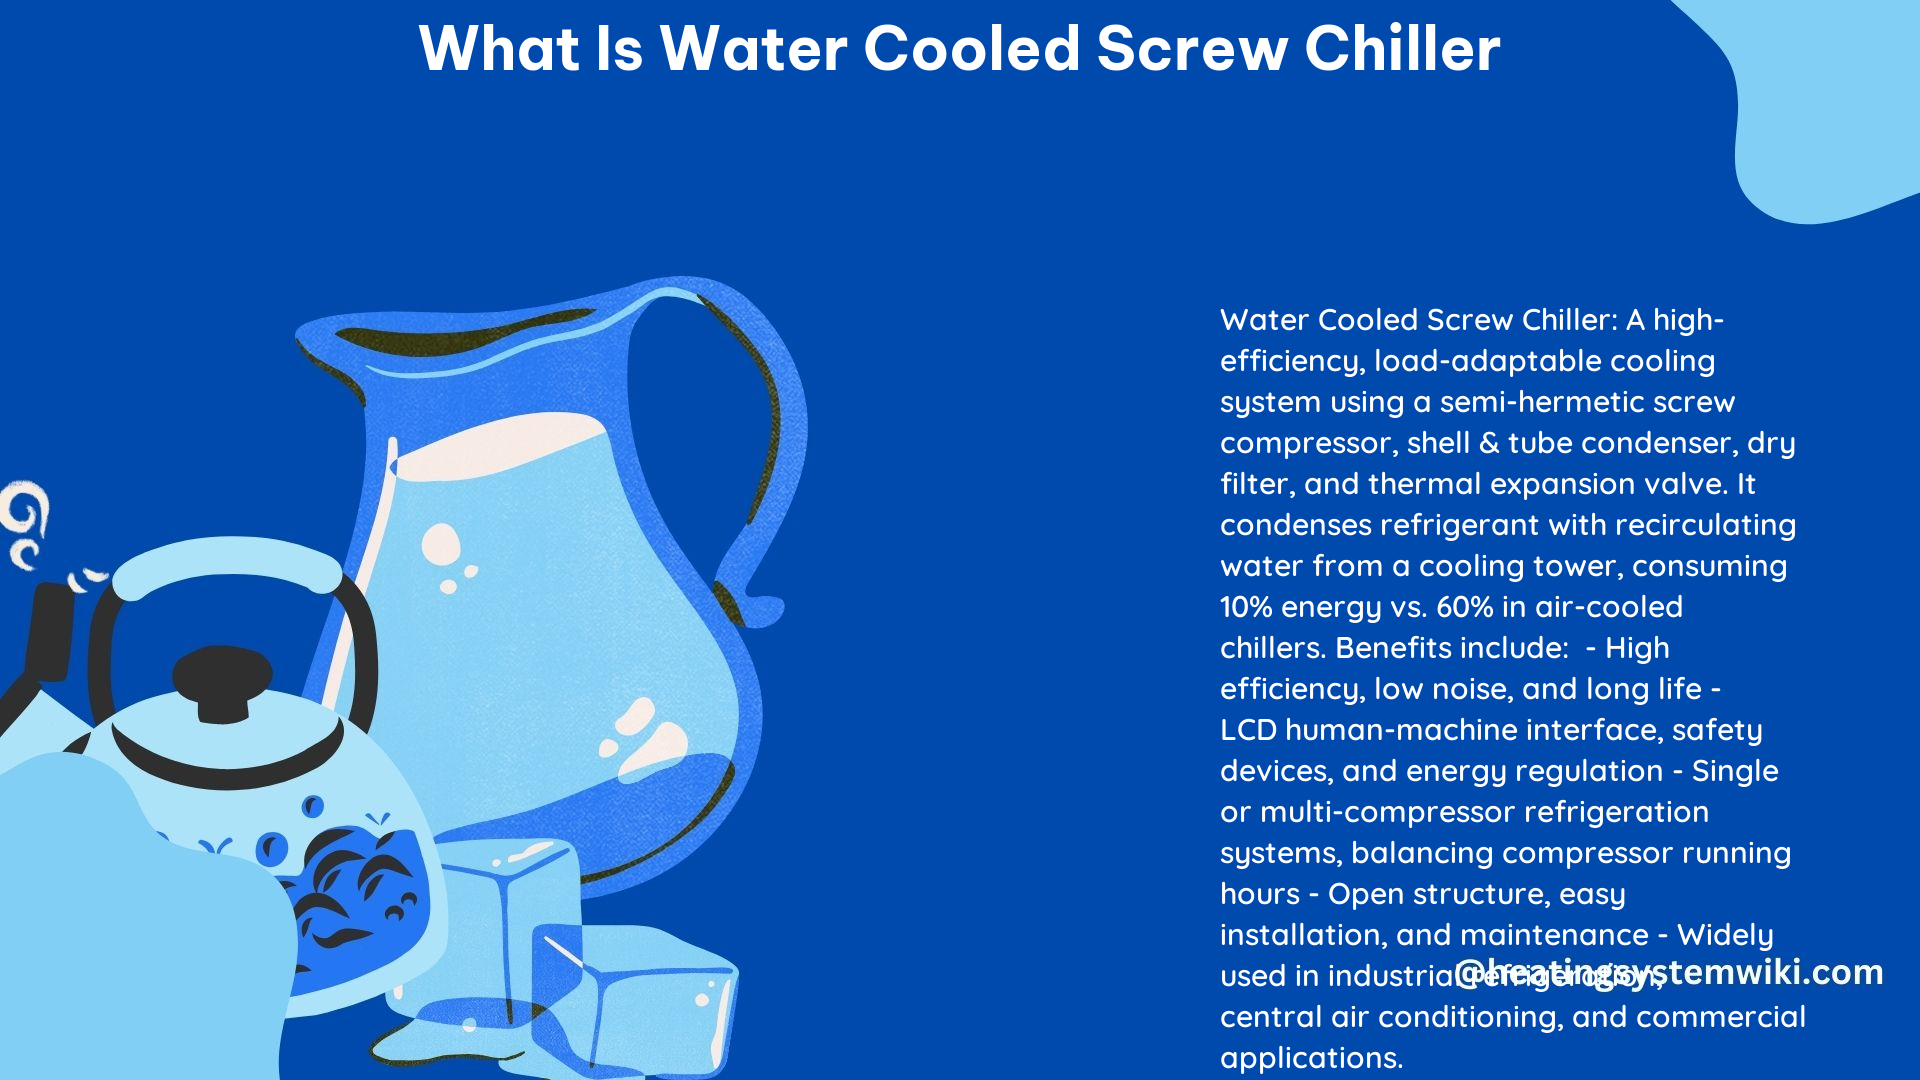 What Is Water Cooled Screw Chiller